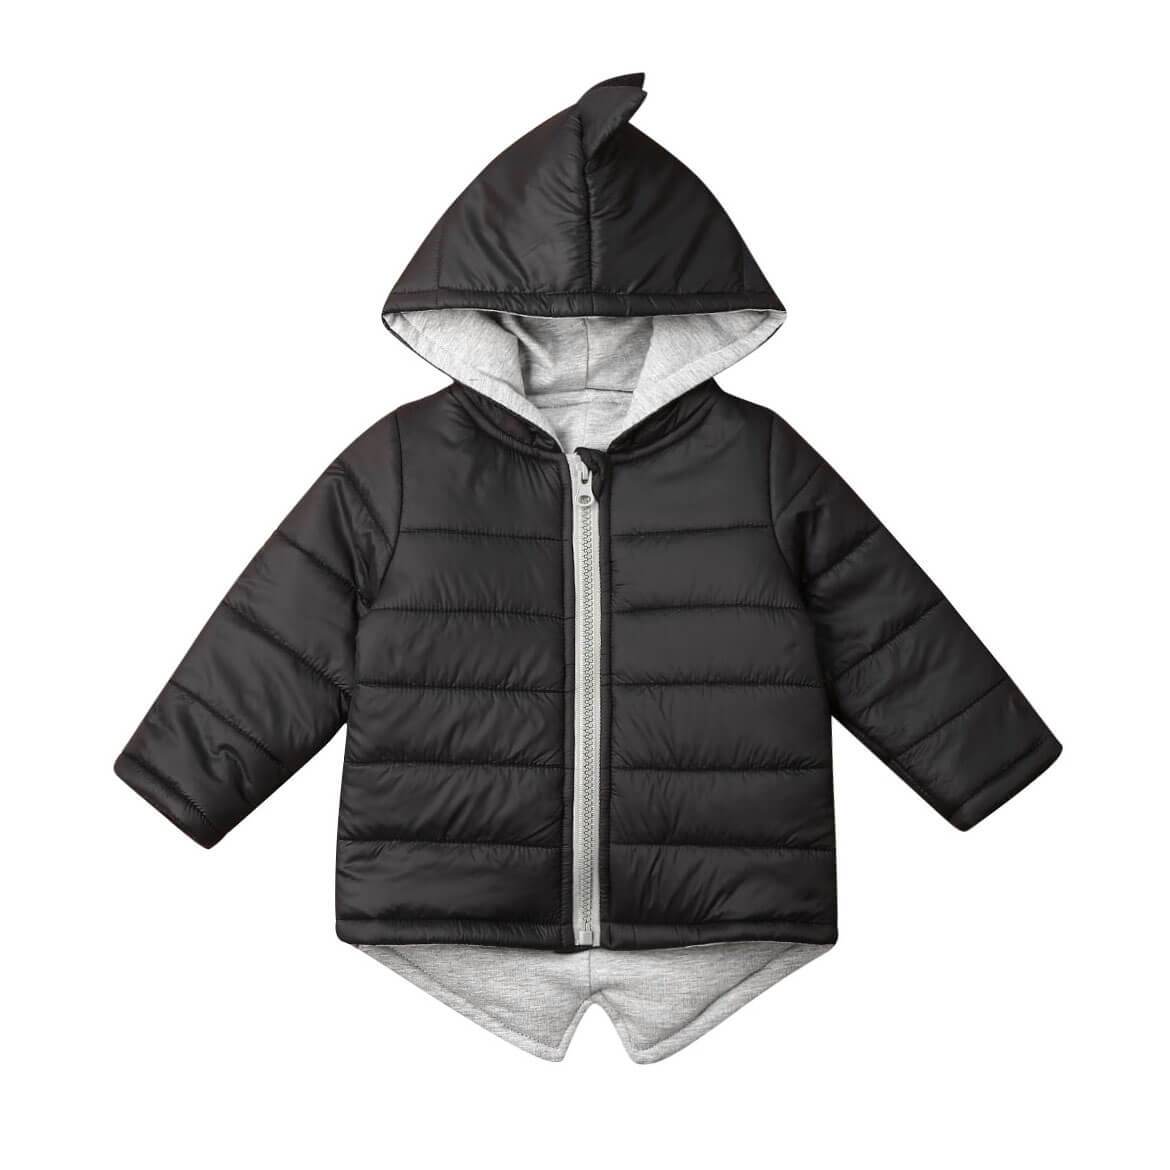 Toddler Girl Jackets & Coats | The Trendy Toddlers